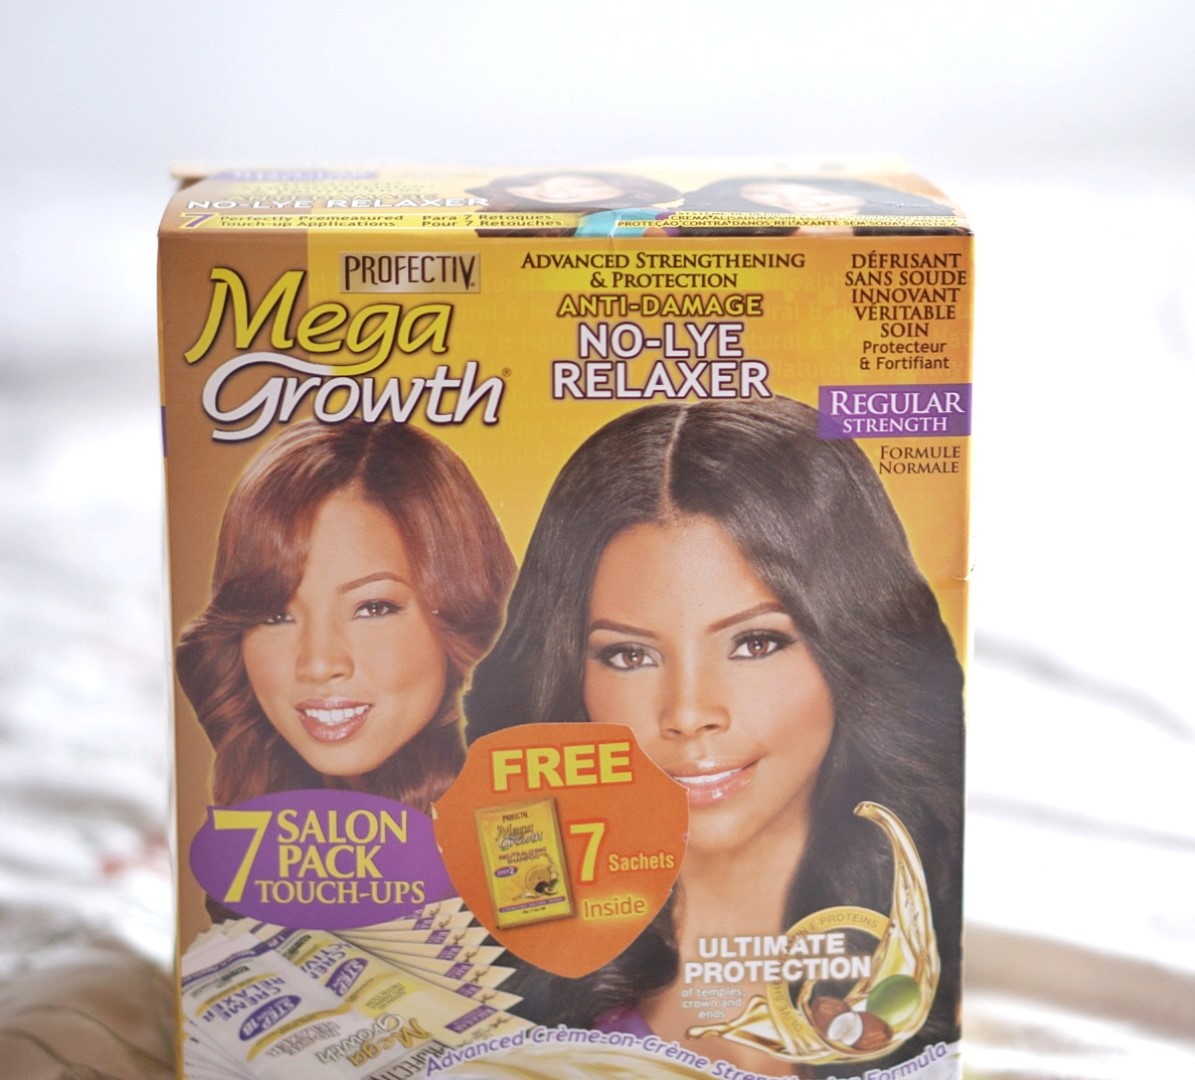 Profectiv mega growth relaxer for healthy relaxed hair